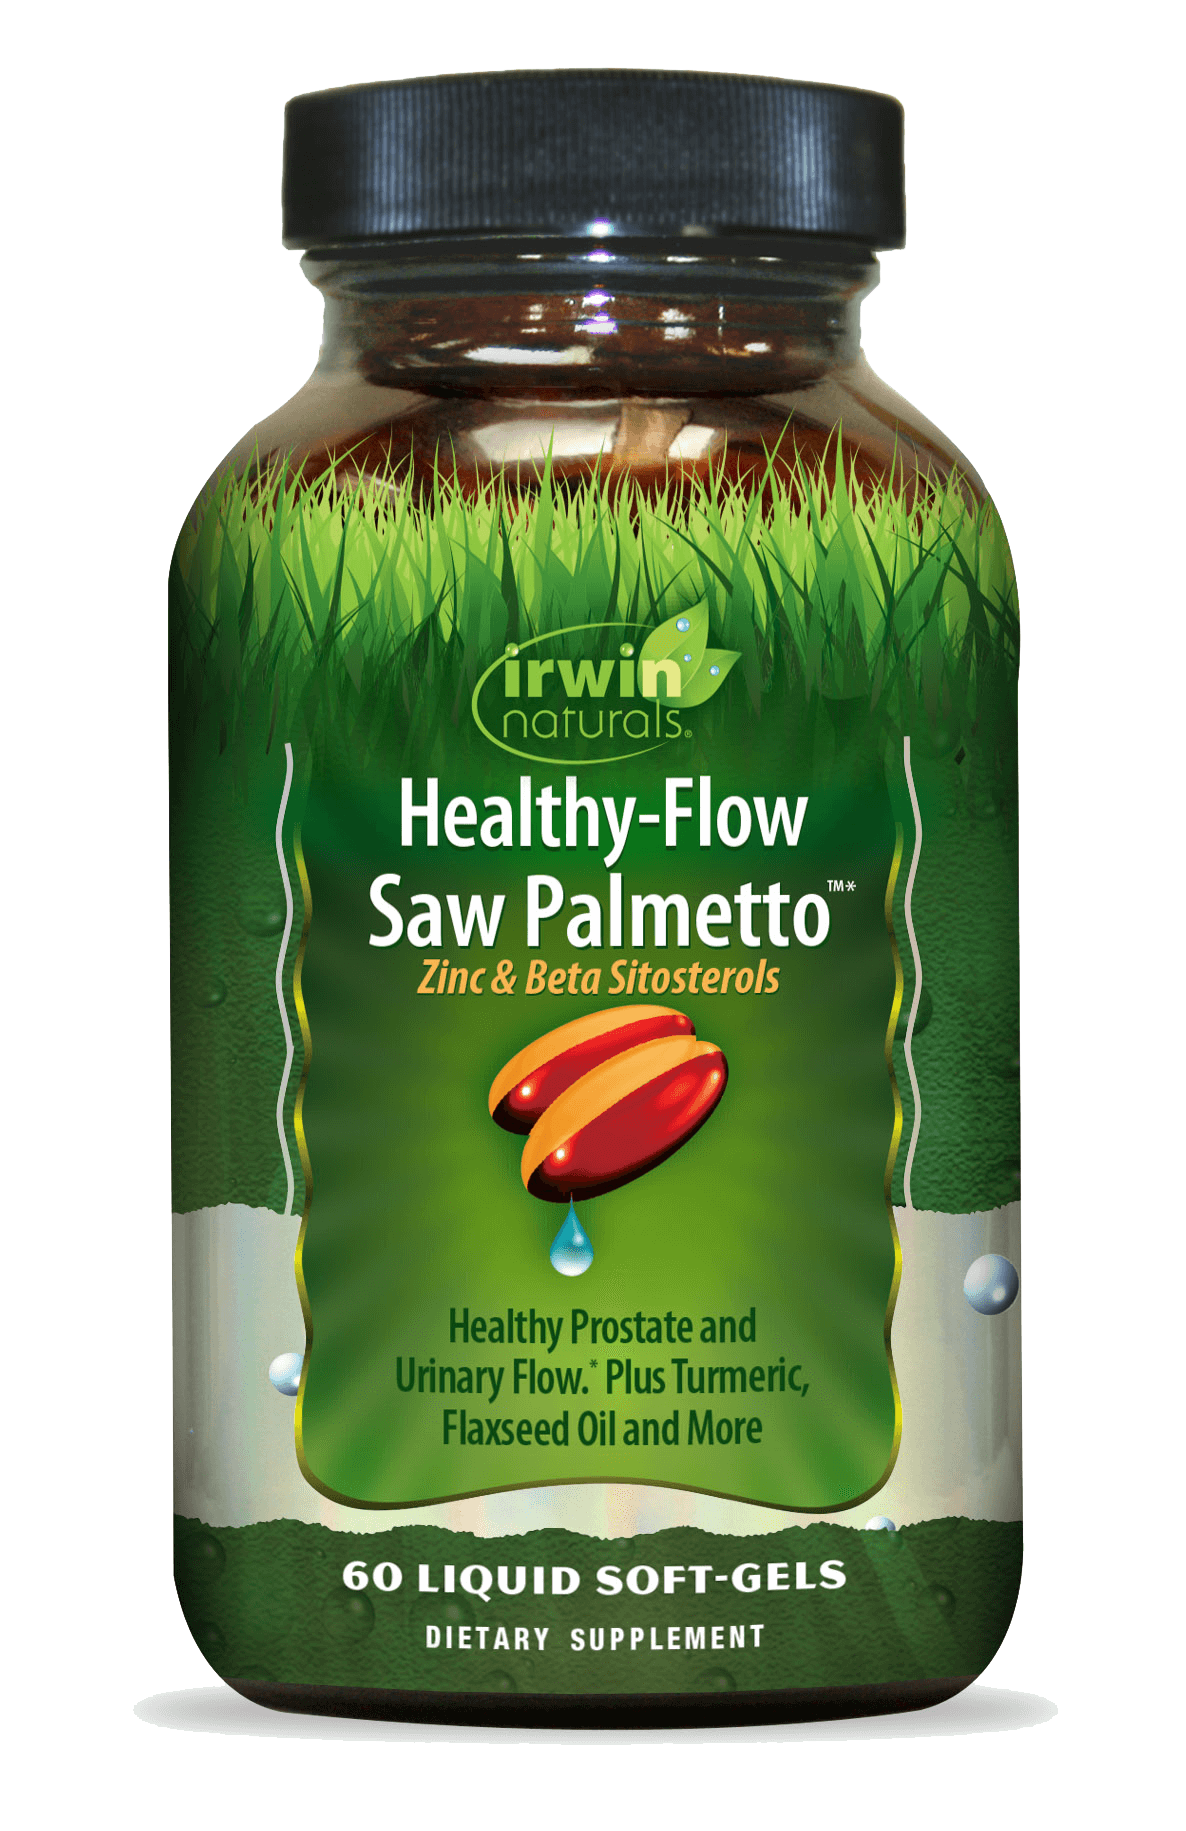 Healthy Flow Saw Palmetto Zinc and Beta Sitosterols by Irwin Naturals